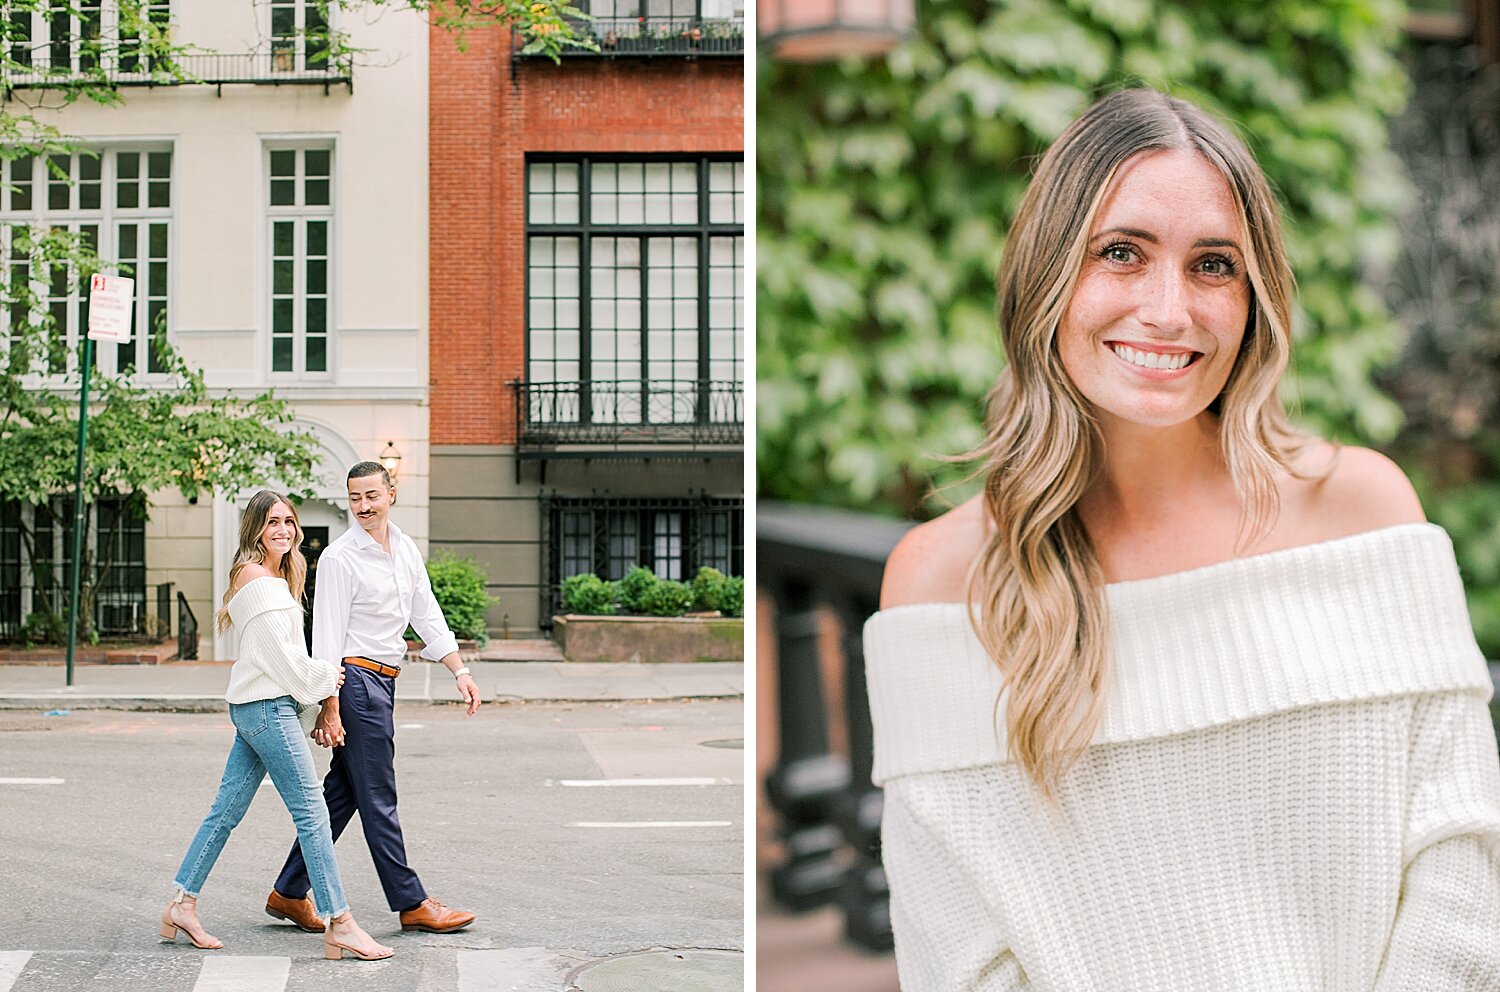 Village engagement session in New York | Asher Gardner Photography | The Village engagement session